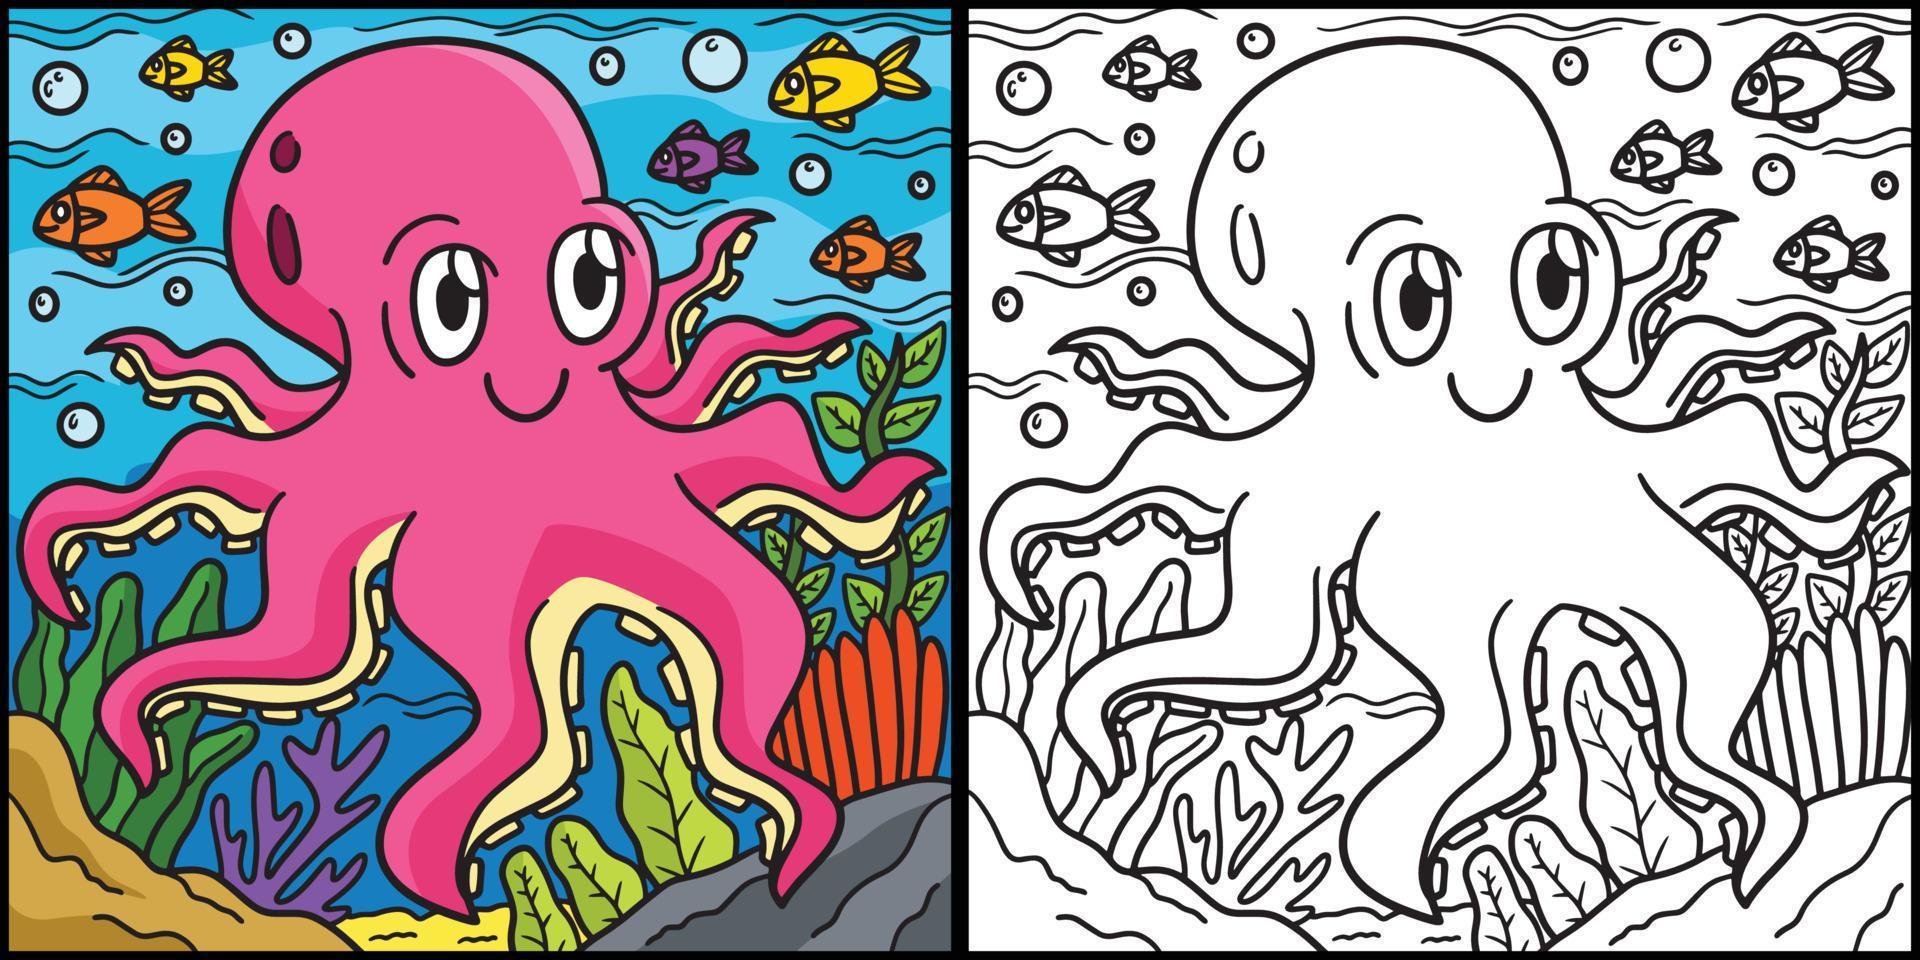 Octopus Coloring Page Colored Illustration vector